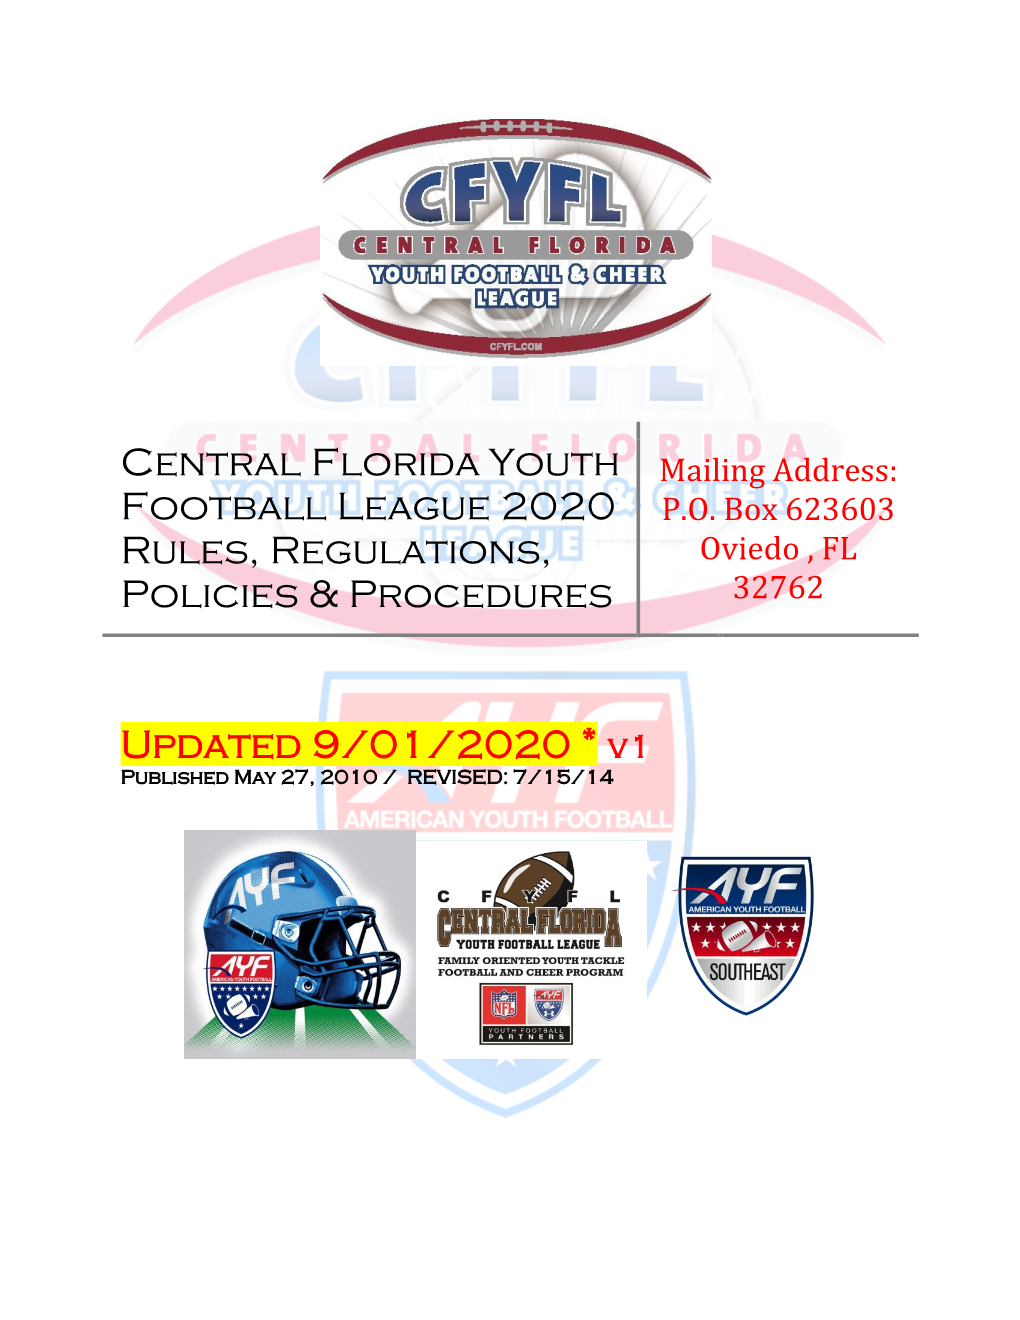 Central Florida Youth Football League 2013 Rules, Regulations, Policies